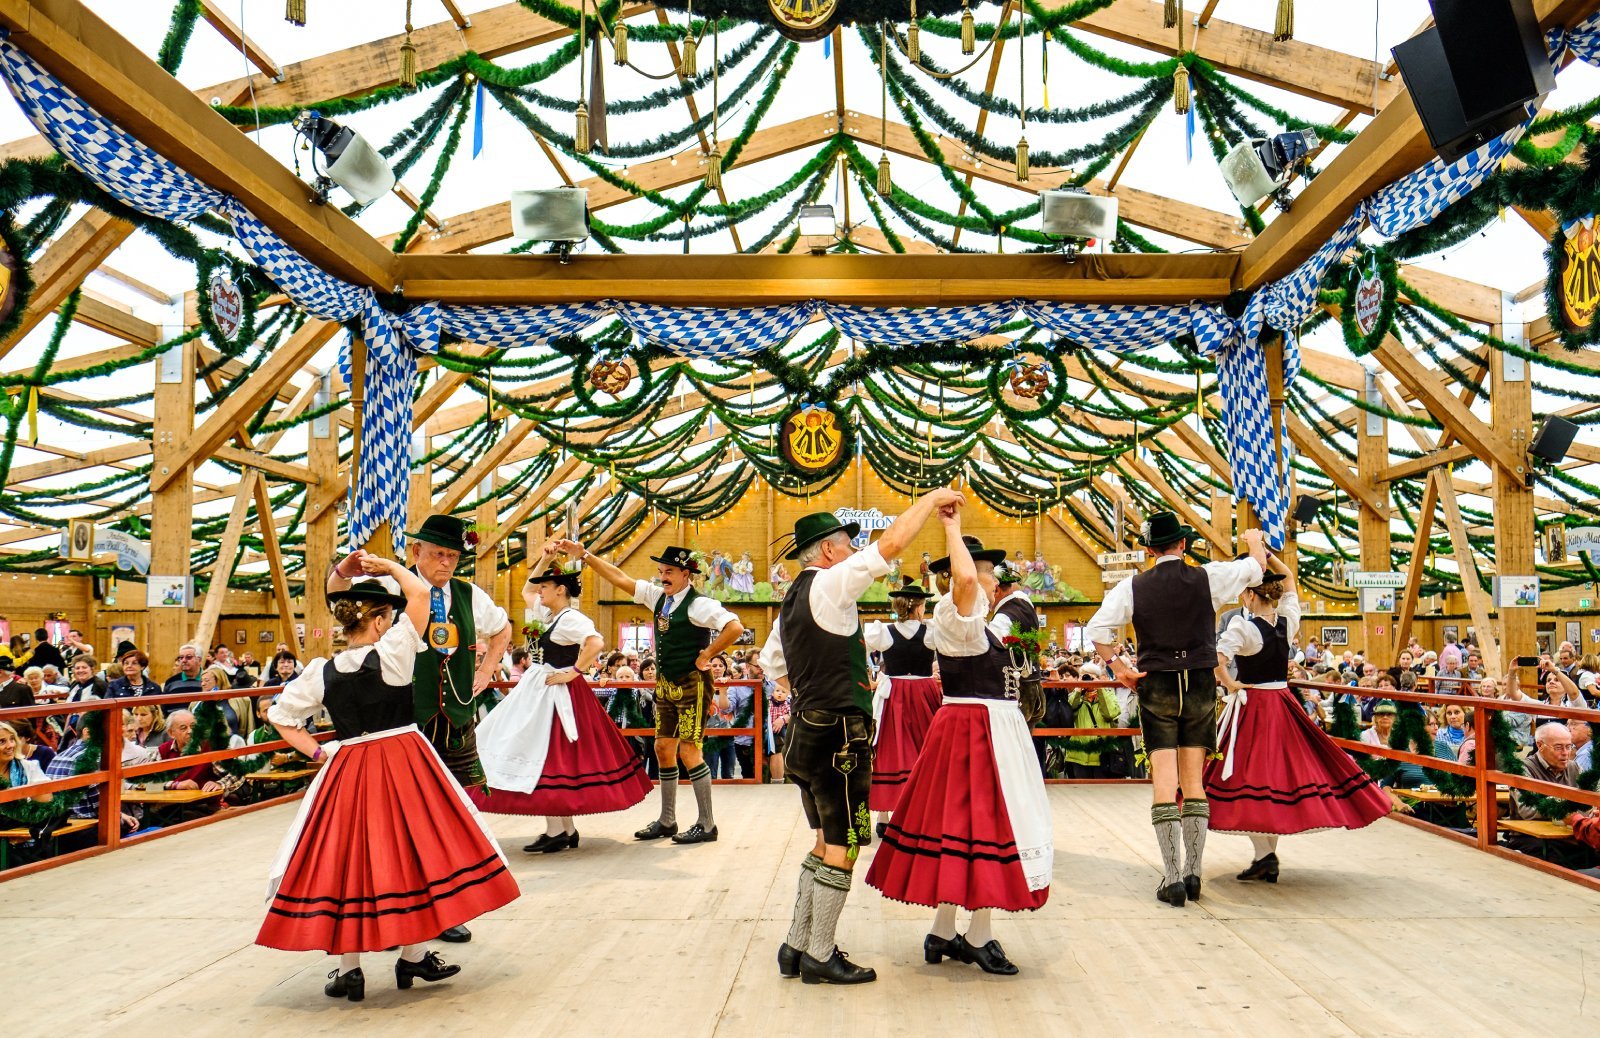 <p class="wp-caption-text">Image Credit: Shutterstock / FooTToo</p>  <p>From serene beer gardens to lively tents filled with singing, dancing, and the clinking of steins, Oktoberfest brings Bavarian culture to life in an exuberant celebration.</p>